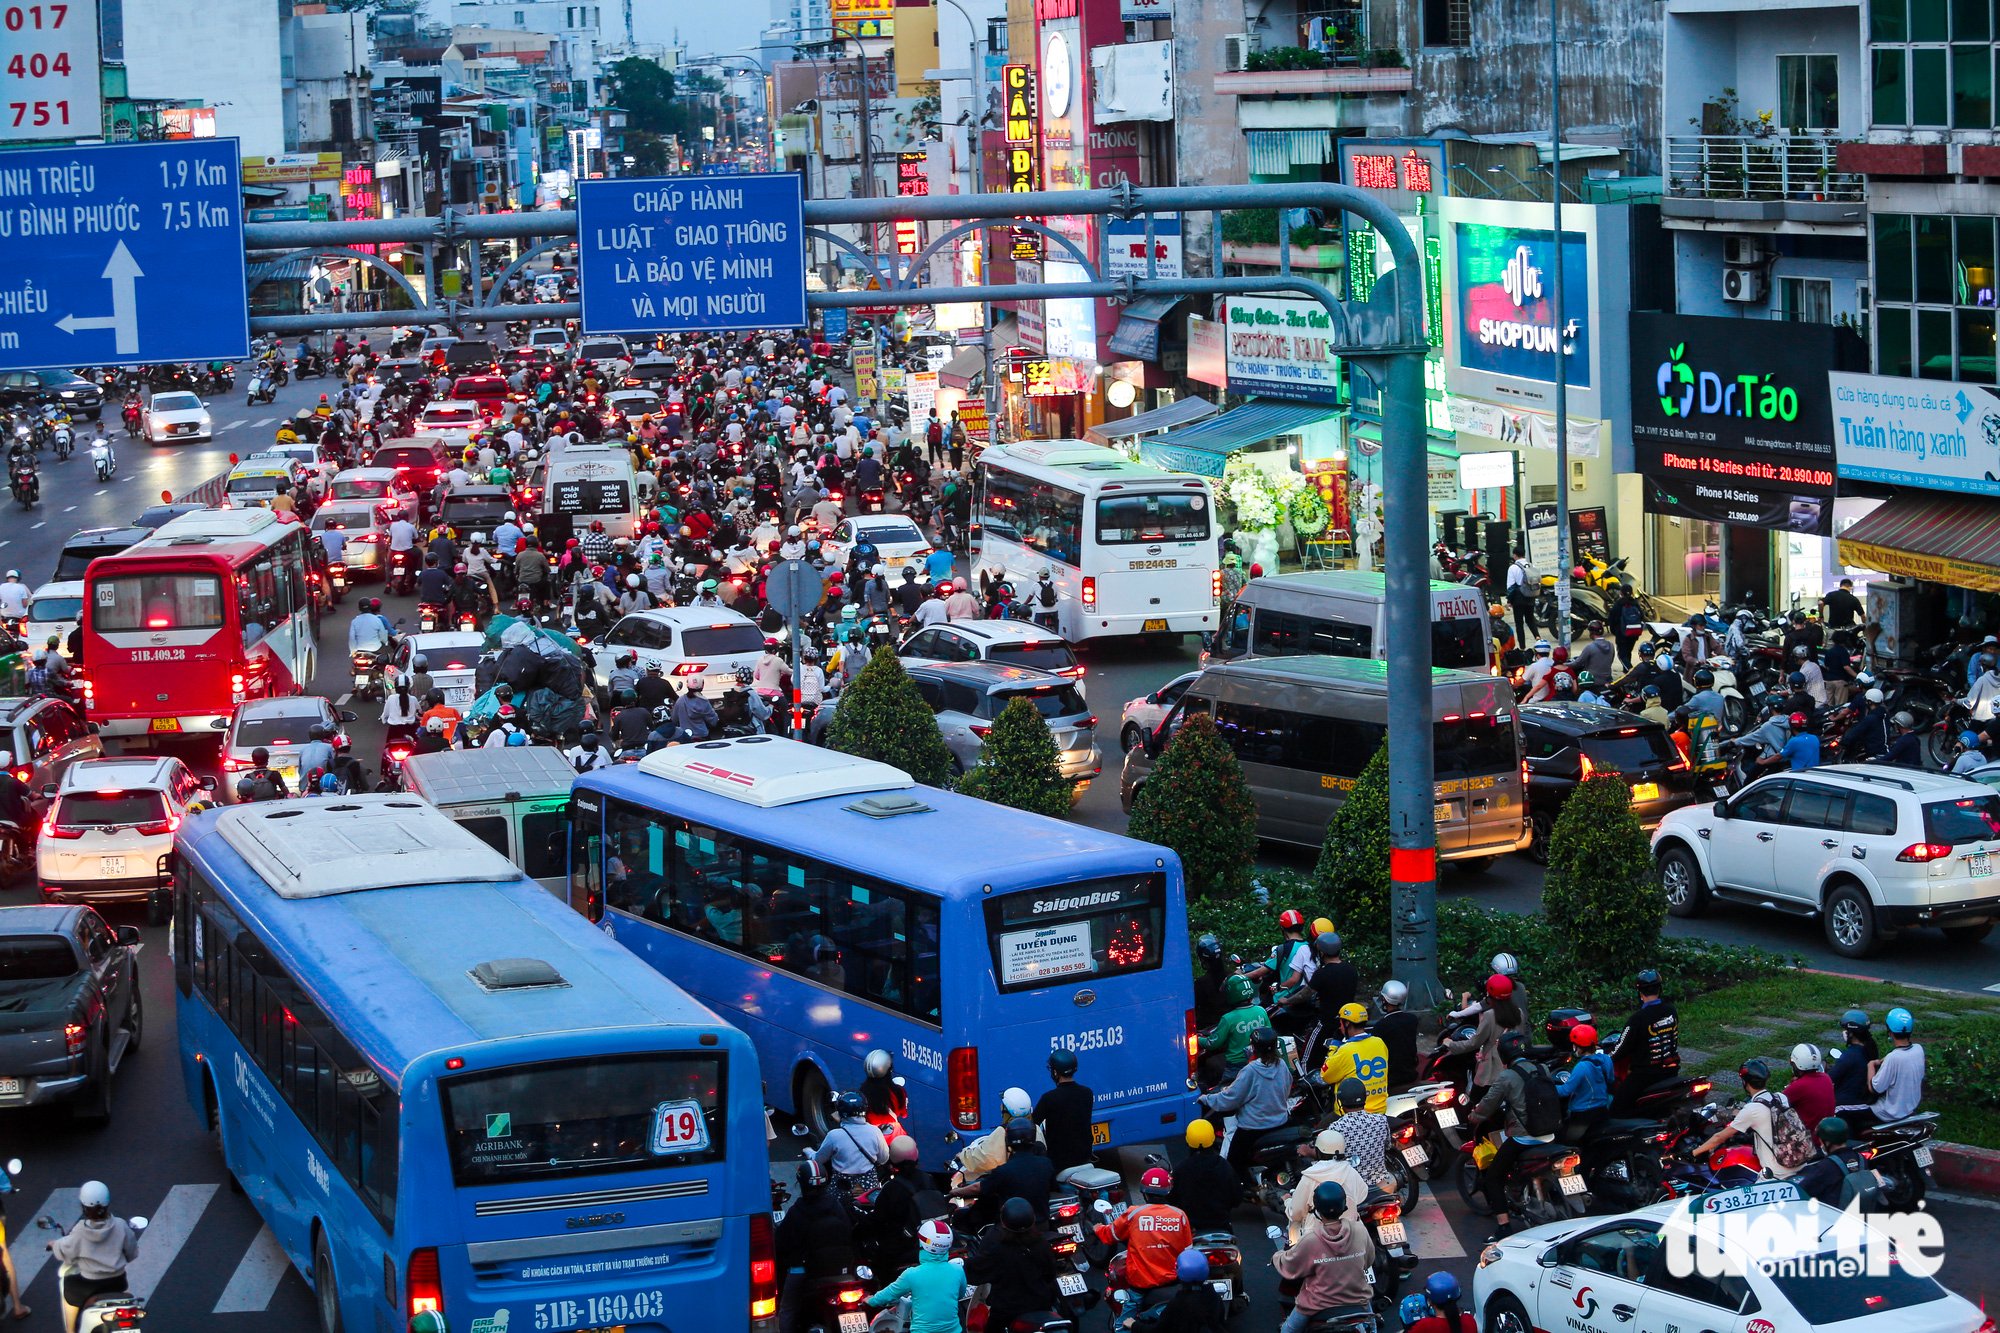 Buses commute during rush hours at the Hang Xanh Intersection in Binh Thanh District, Ho Chi Minh City. Photo: Chau Tuan / Tuoi Tre